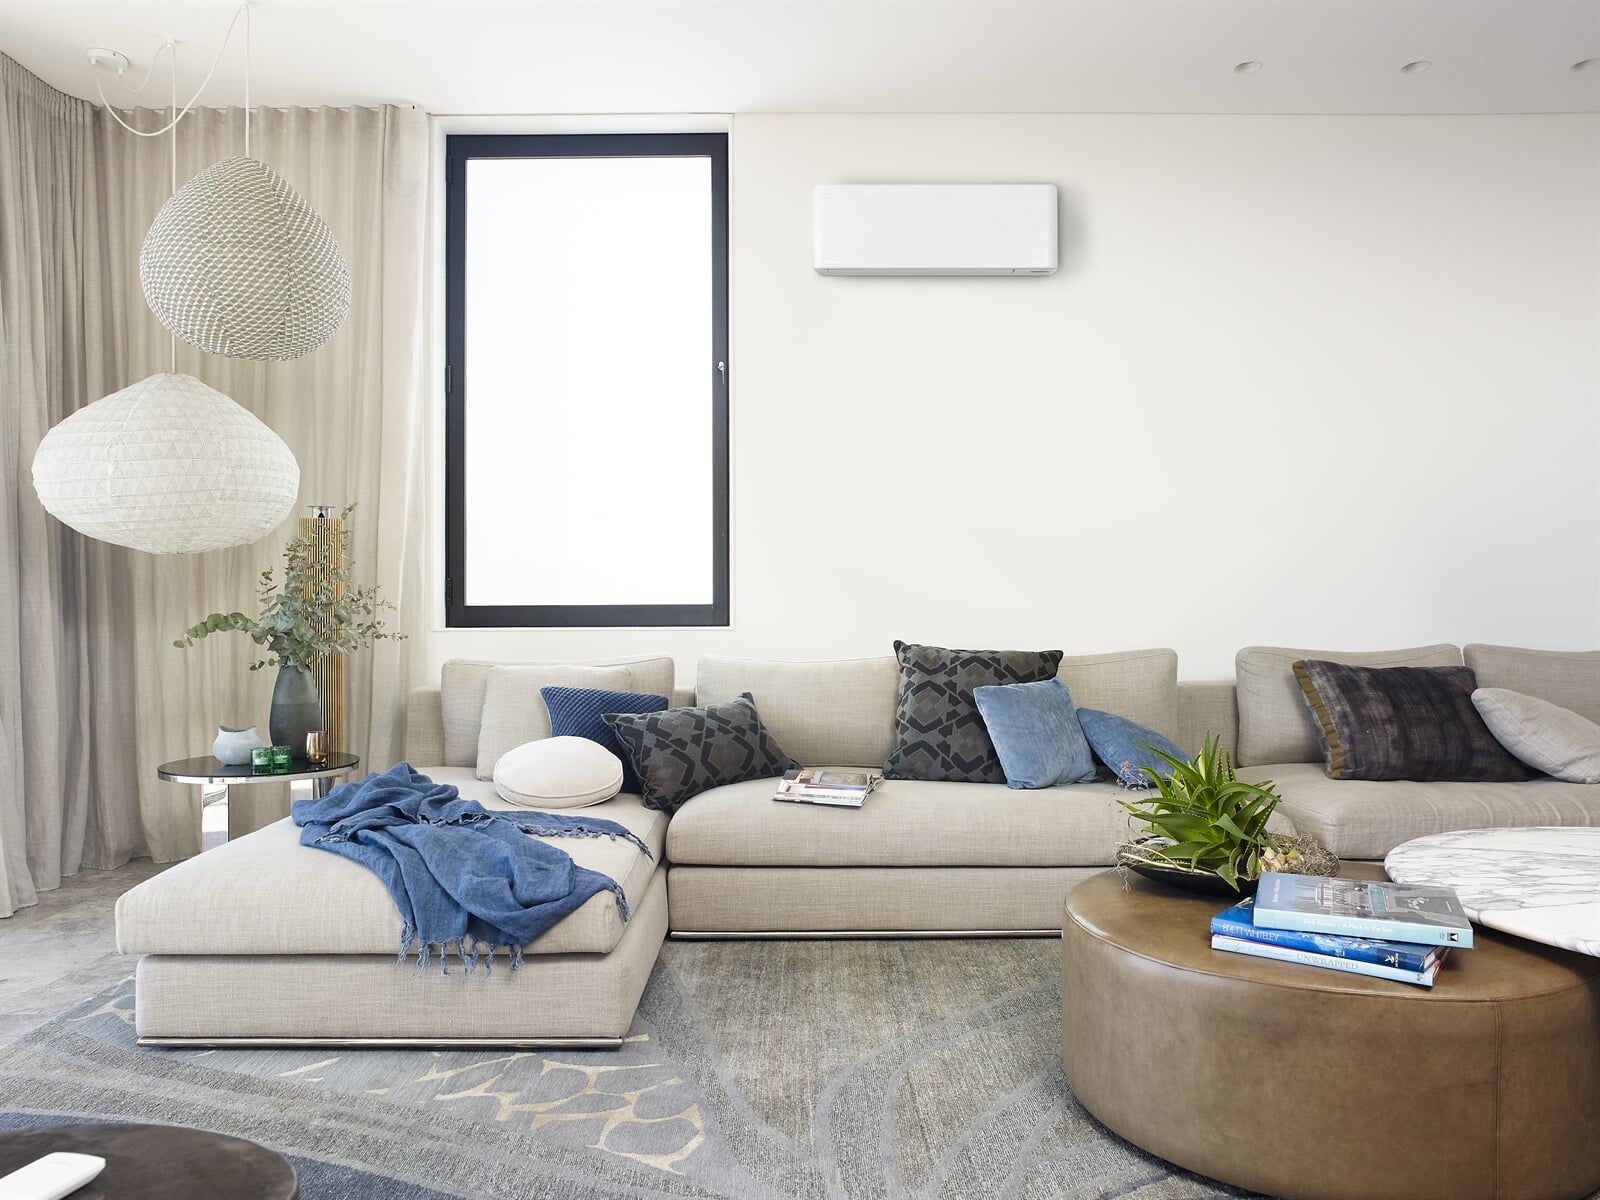 Air Conditoning system mounted on wall in home living room